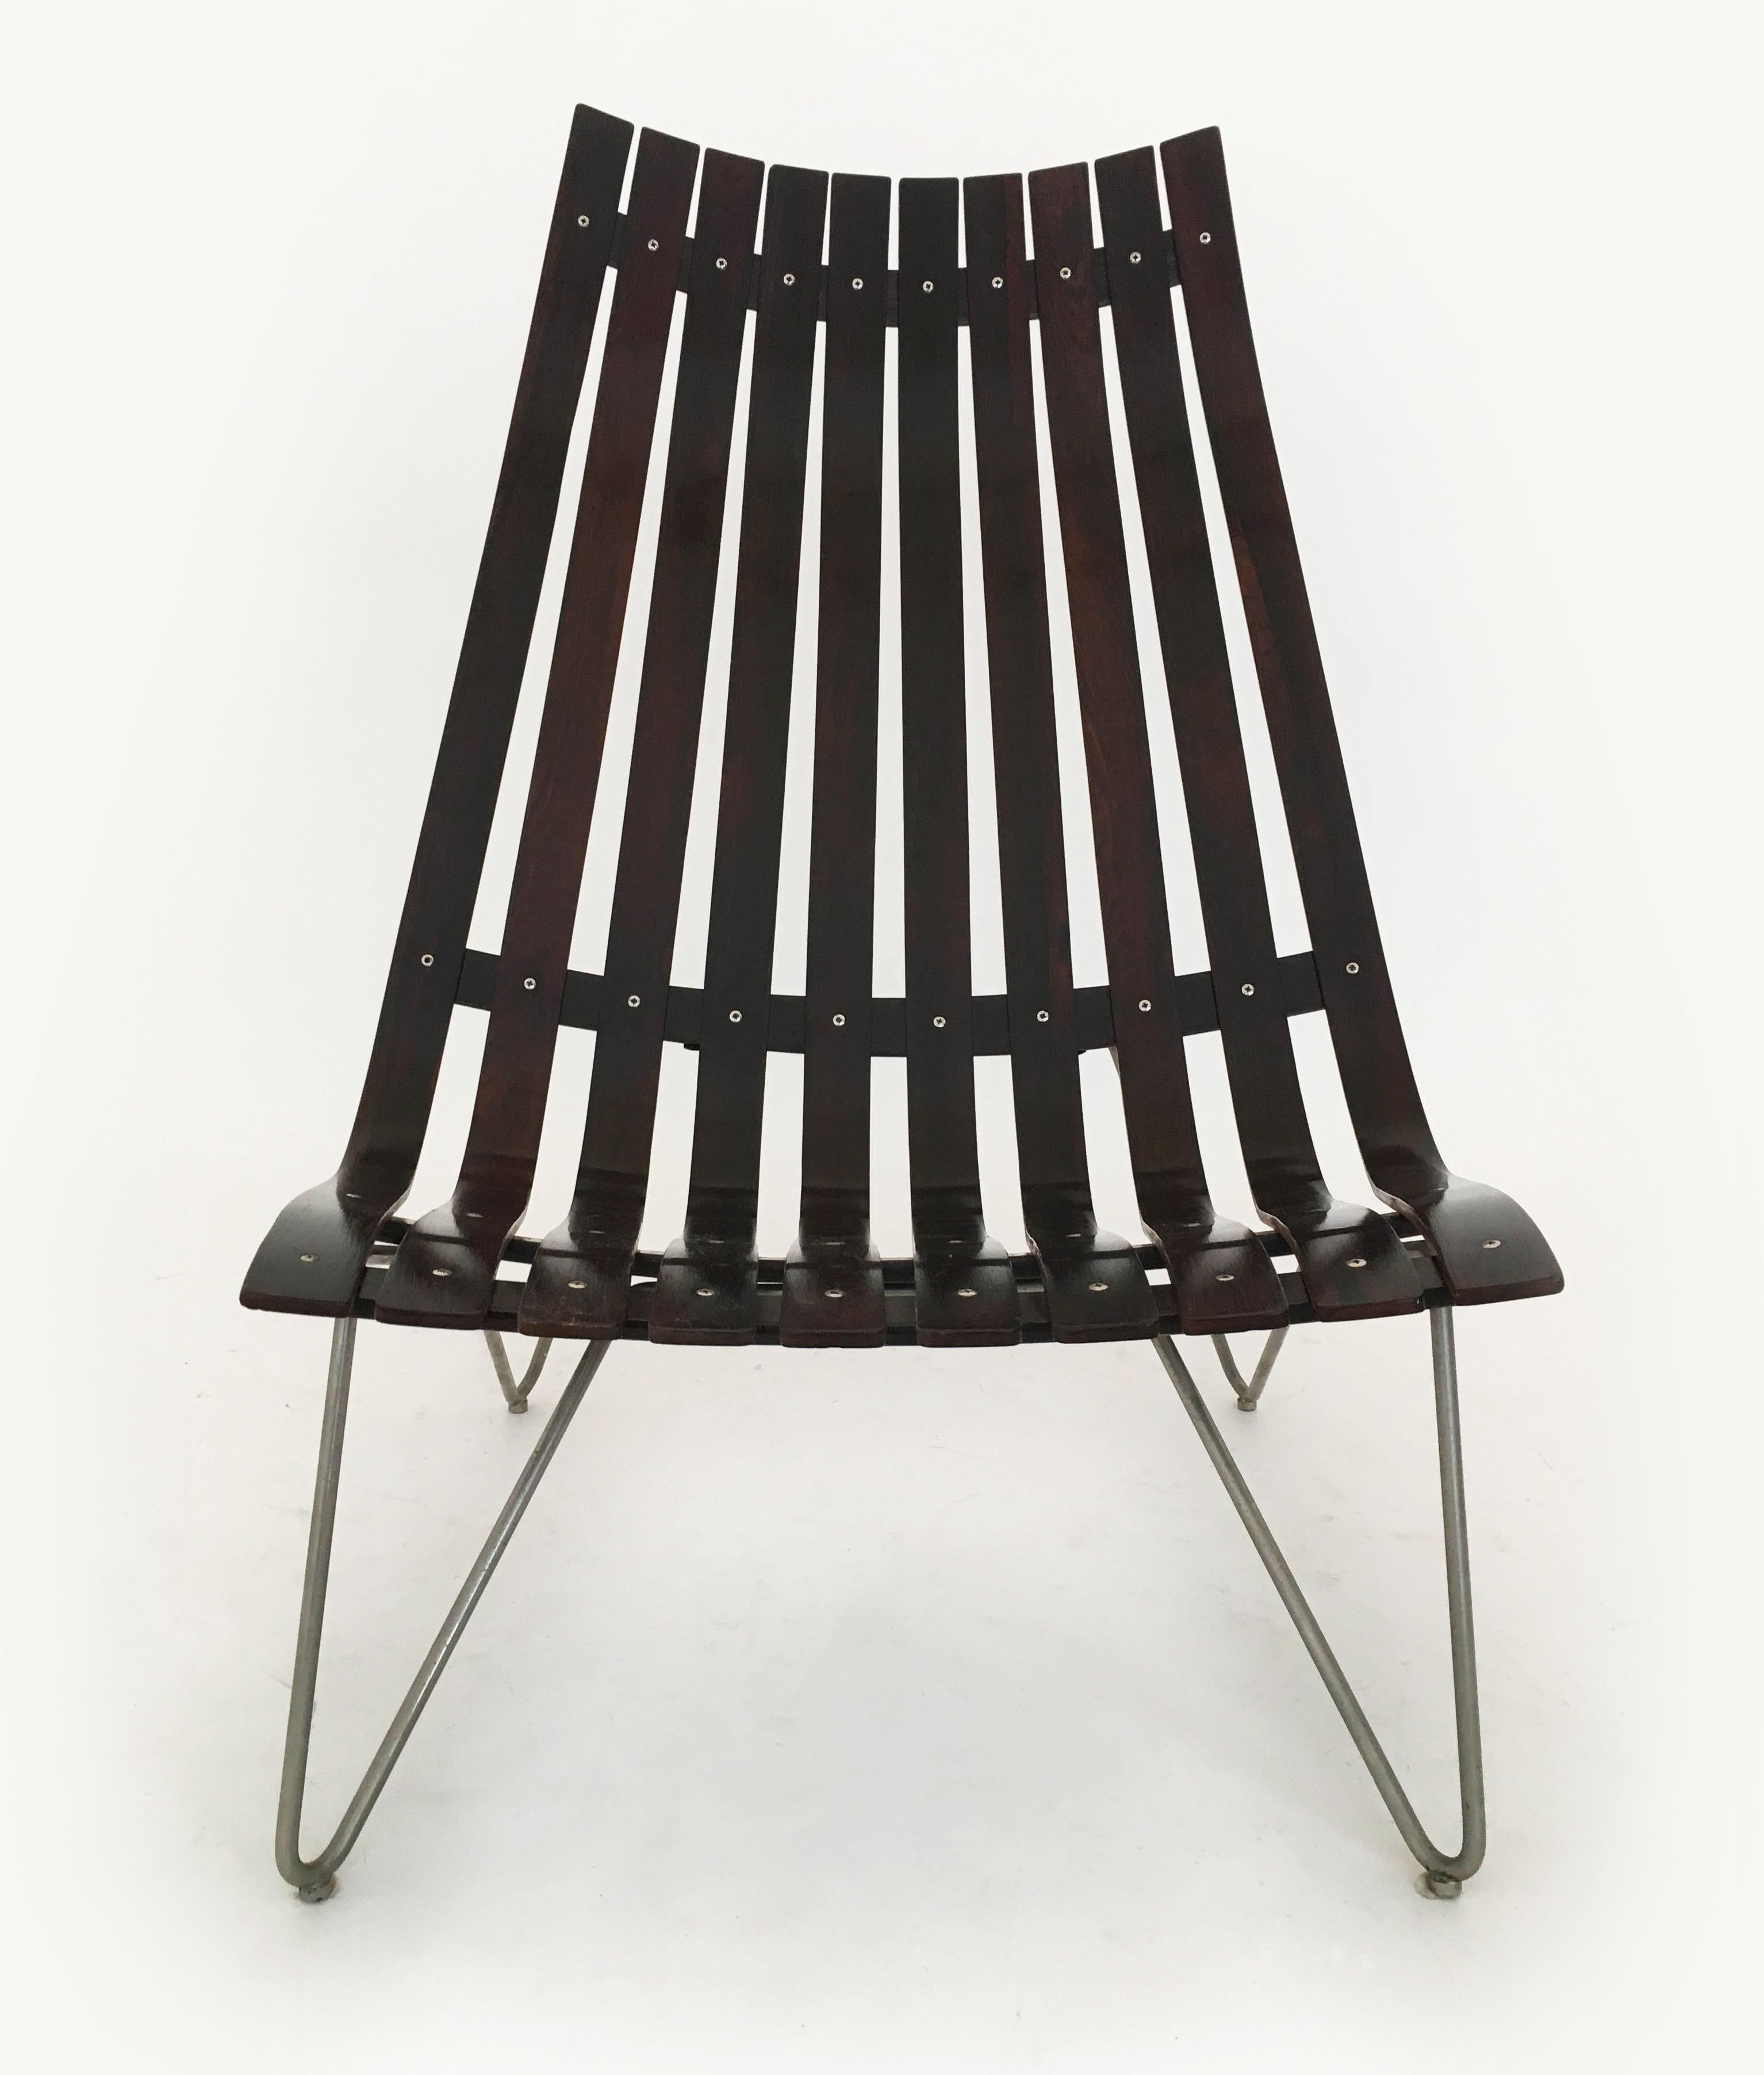 Hans Brattrud Lounge Chair Model 'Scandia' by Hove Mobler, Norway 1950s For Sale 5